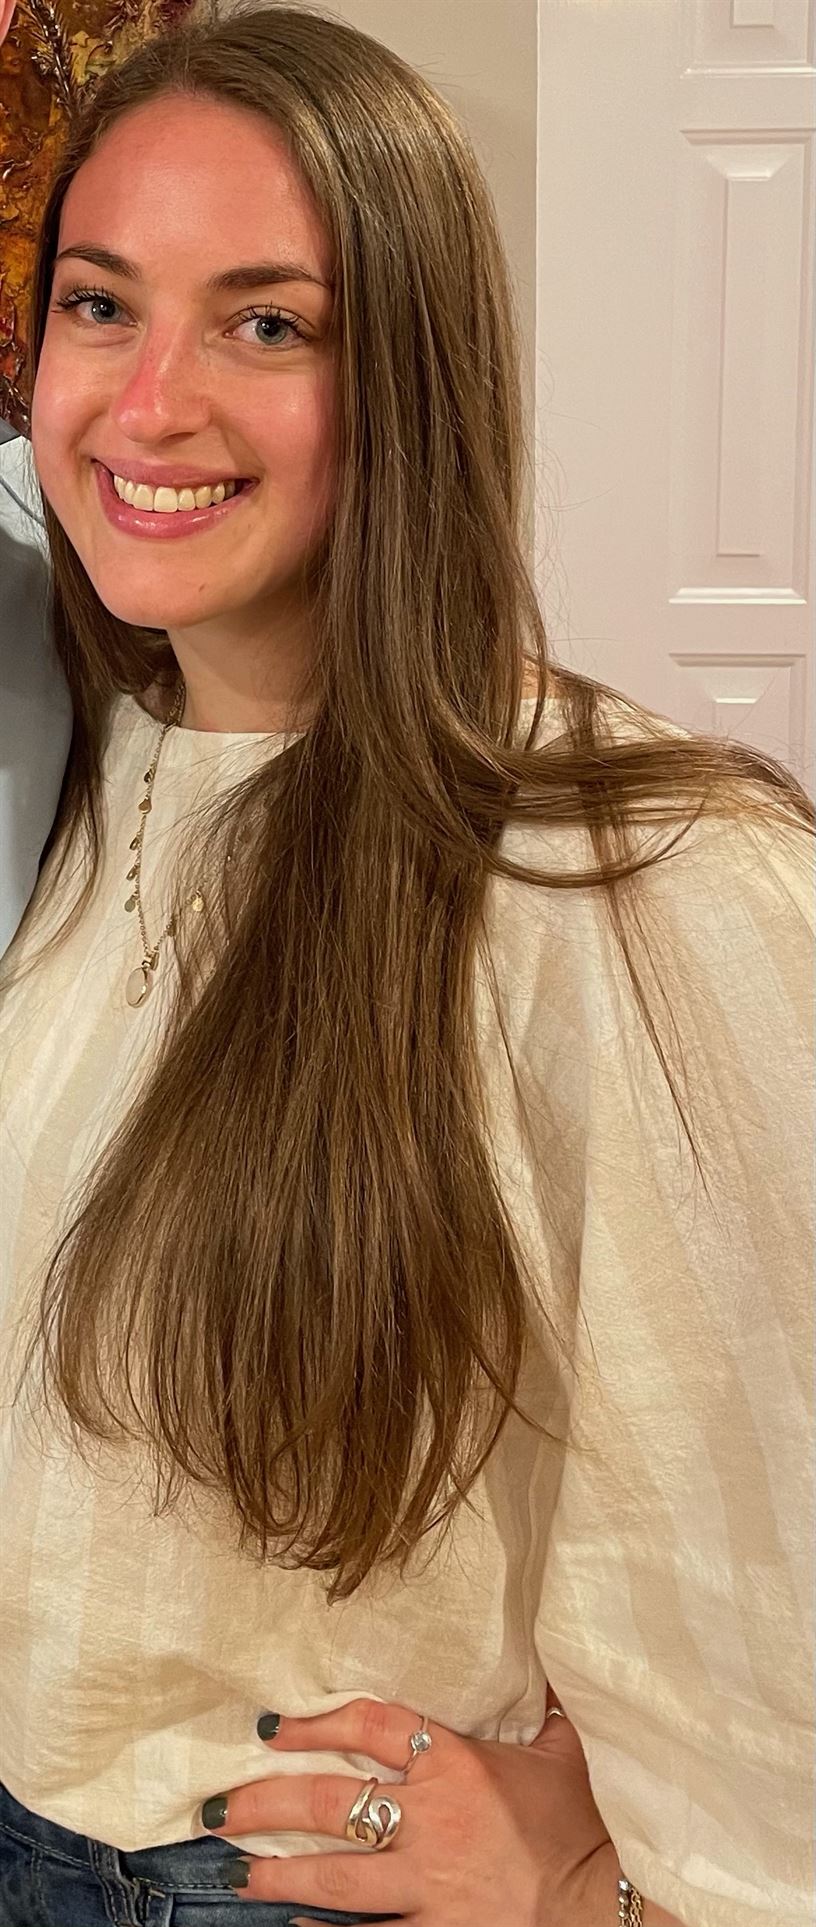 Marlee Kaplan, a graduate speech pathology student, is in favor of Montclair State's latest announcement and is glad to know that the university is offering the vaccine on campus. Photo courtesy of Marlee Kaplan